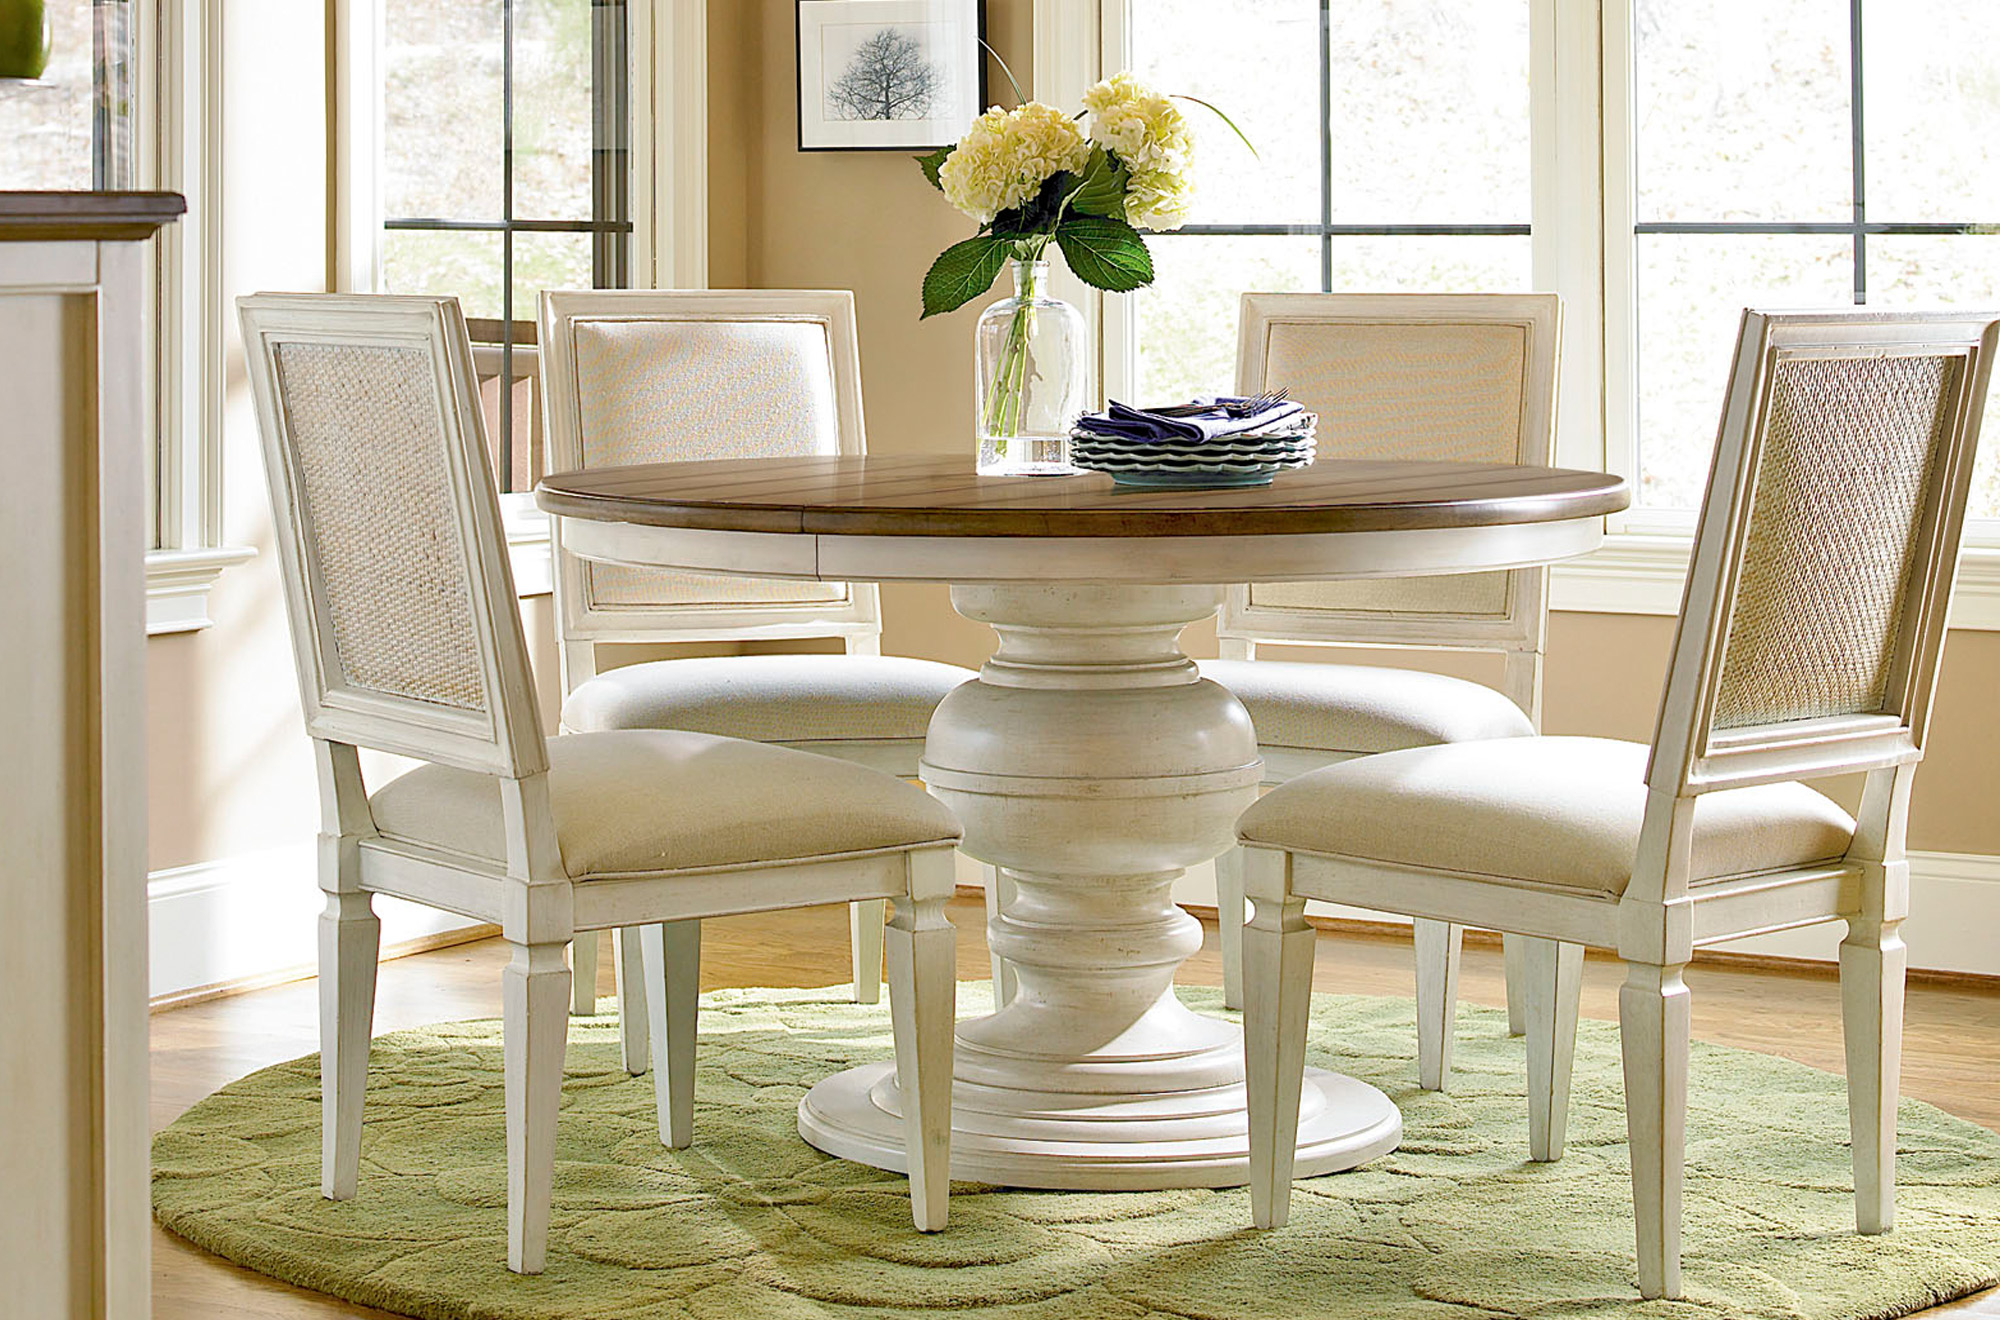 a white table with four chairs around it